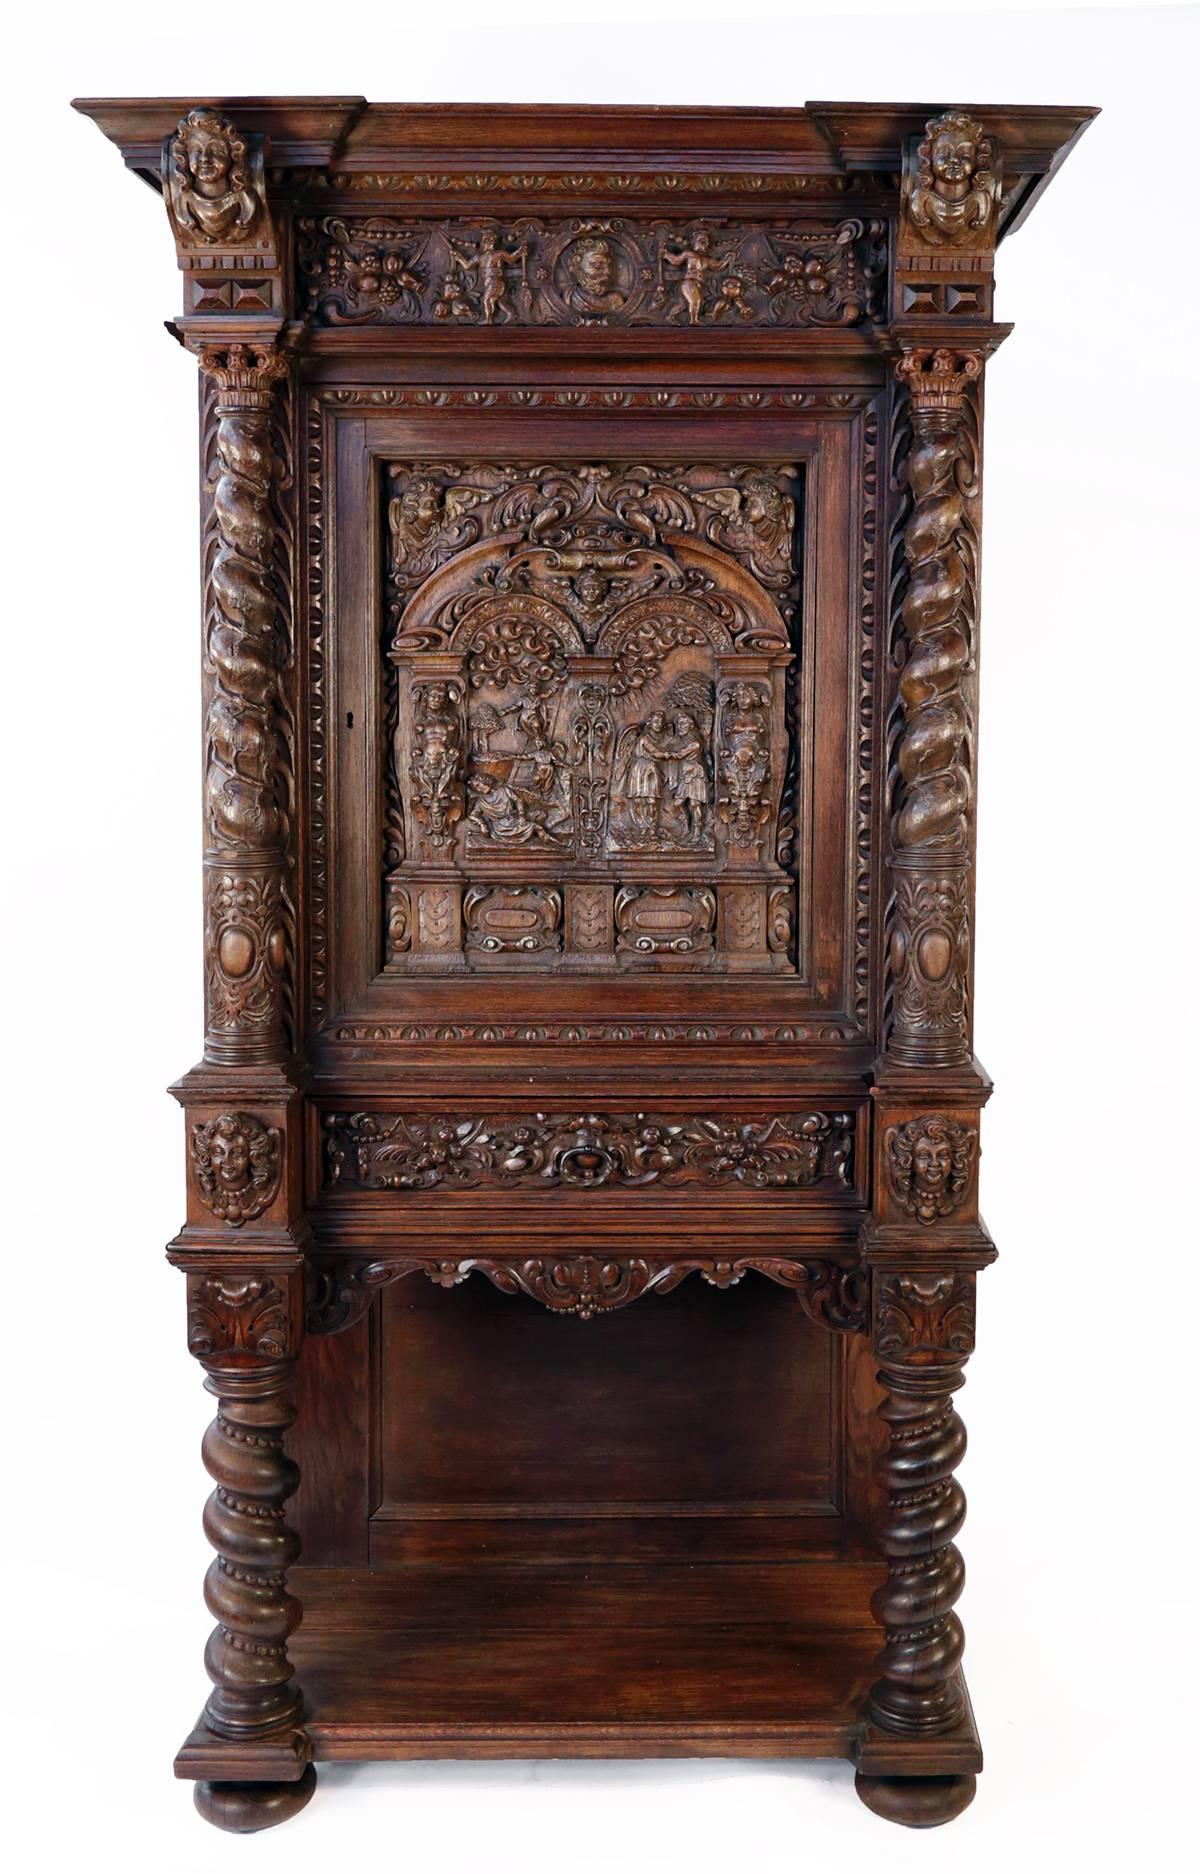 Heavily carved, the shaped top over a frieze carved in relief with a portrait medallion and putti holding brooms and fruiting vines, over a hinged cabinet door carved with scenes from the life of Jacob, with Solomonic columns flanking, above a